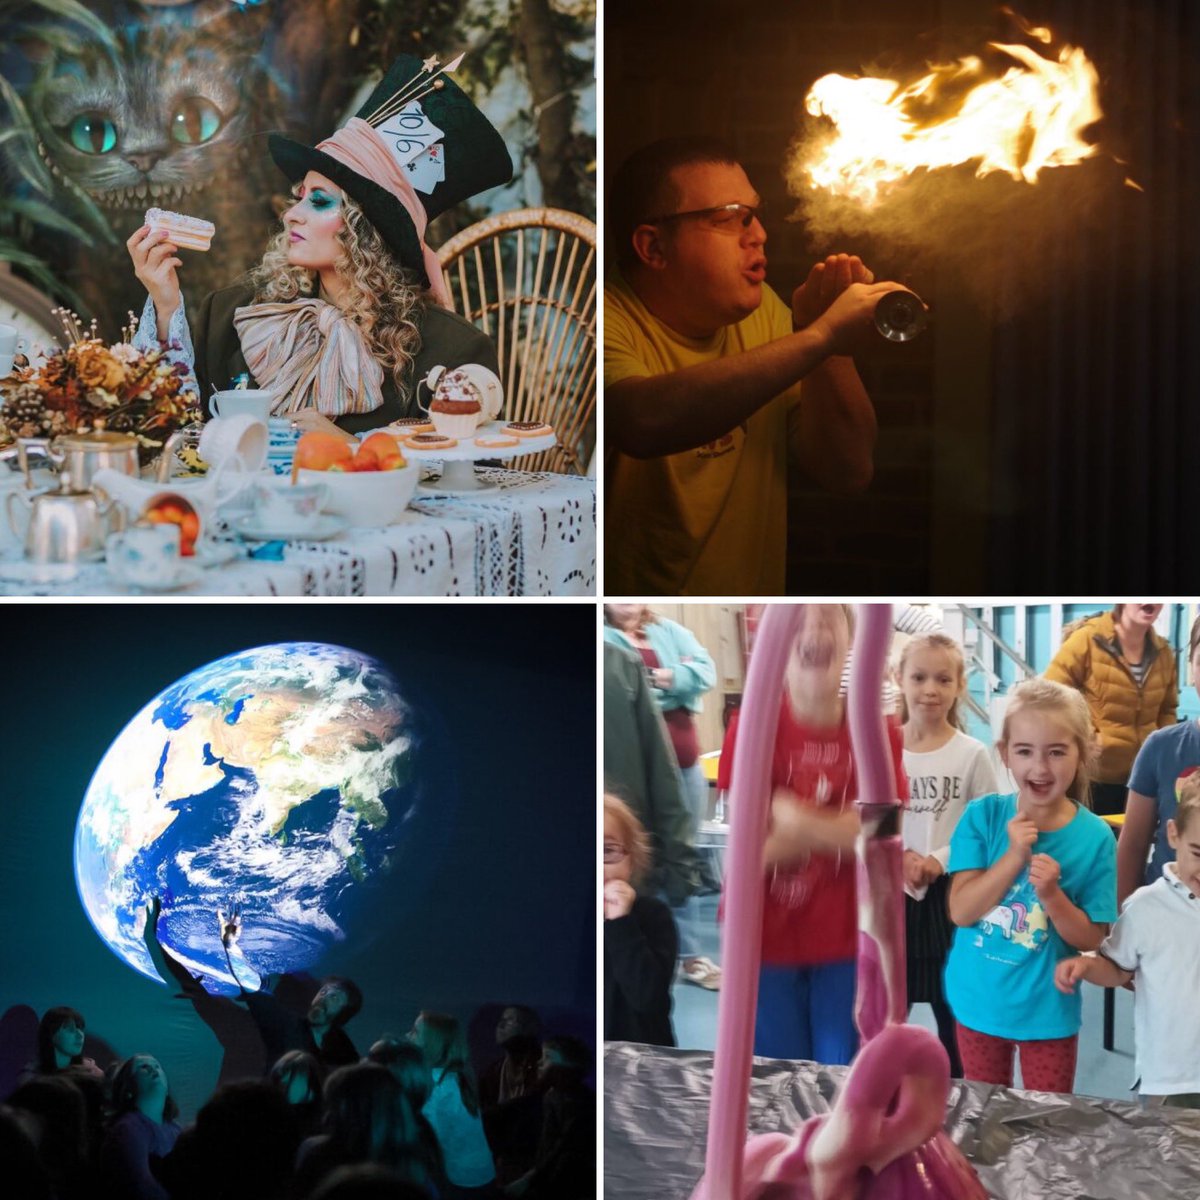 Exciting free family shows are part of The Somerscience Festival on 6th May. Would you like to be wowed by Chemistry displays? Or marvel at the wonders of space in our mini planetarium? Or find out if you can hear colours and feel sounds? Details at Somerscience.co.uk #STEM